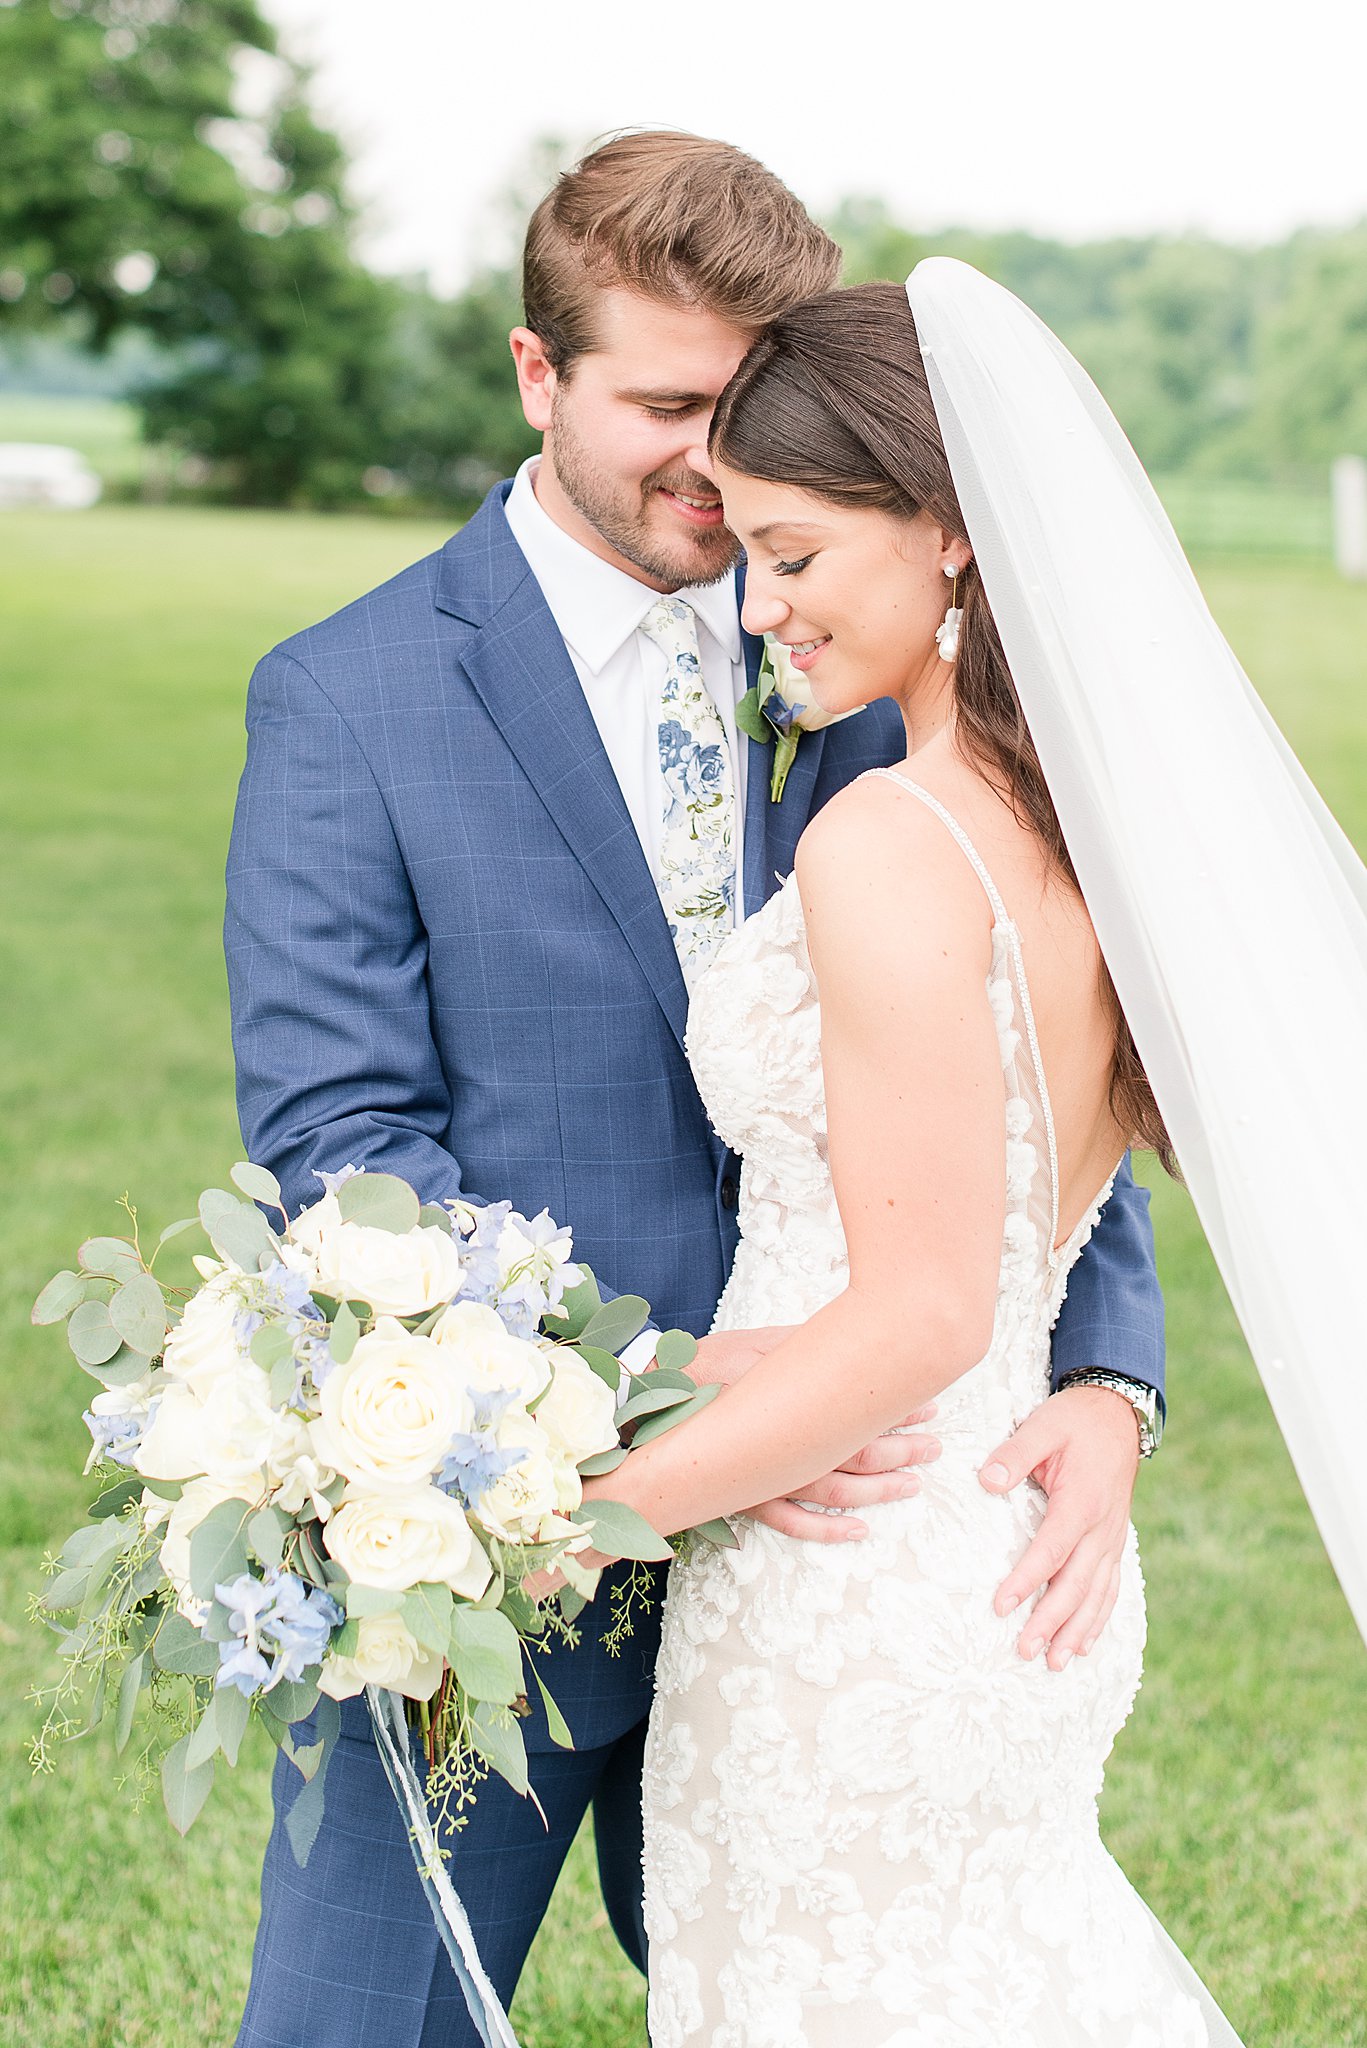 Newlyweds stand close while wearing a lace embroidered dress and blue plaid suit in a lawn at one of the Outdoor Wedding Venues In Baltimore